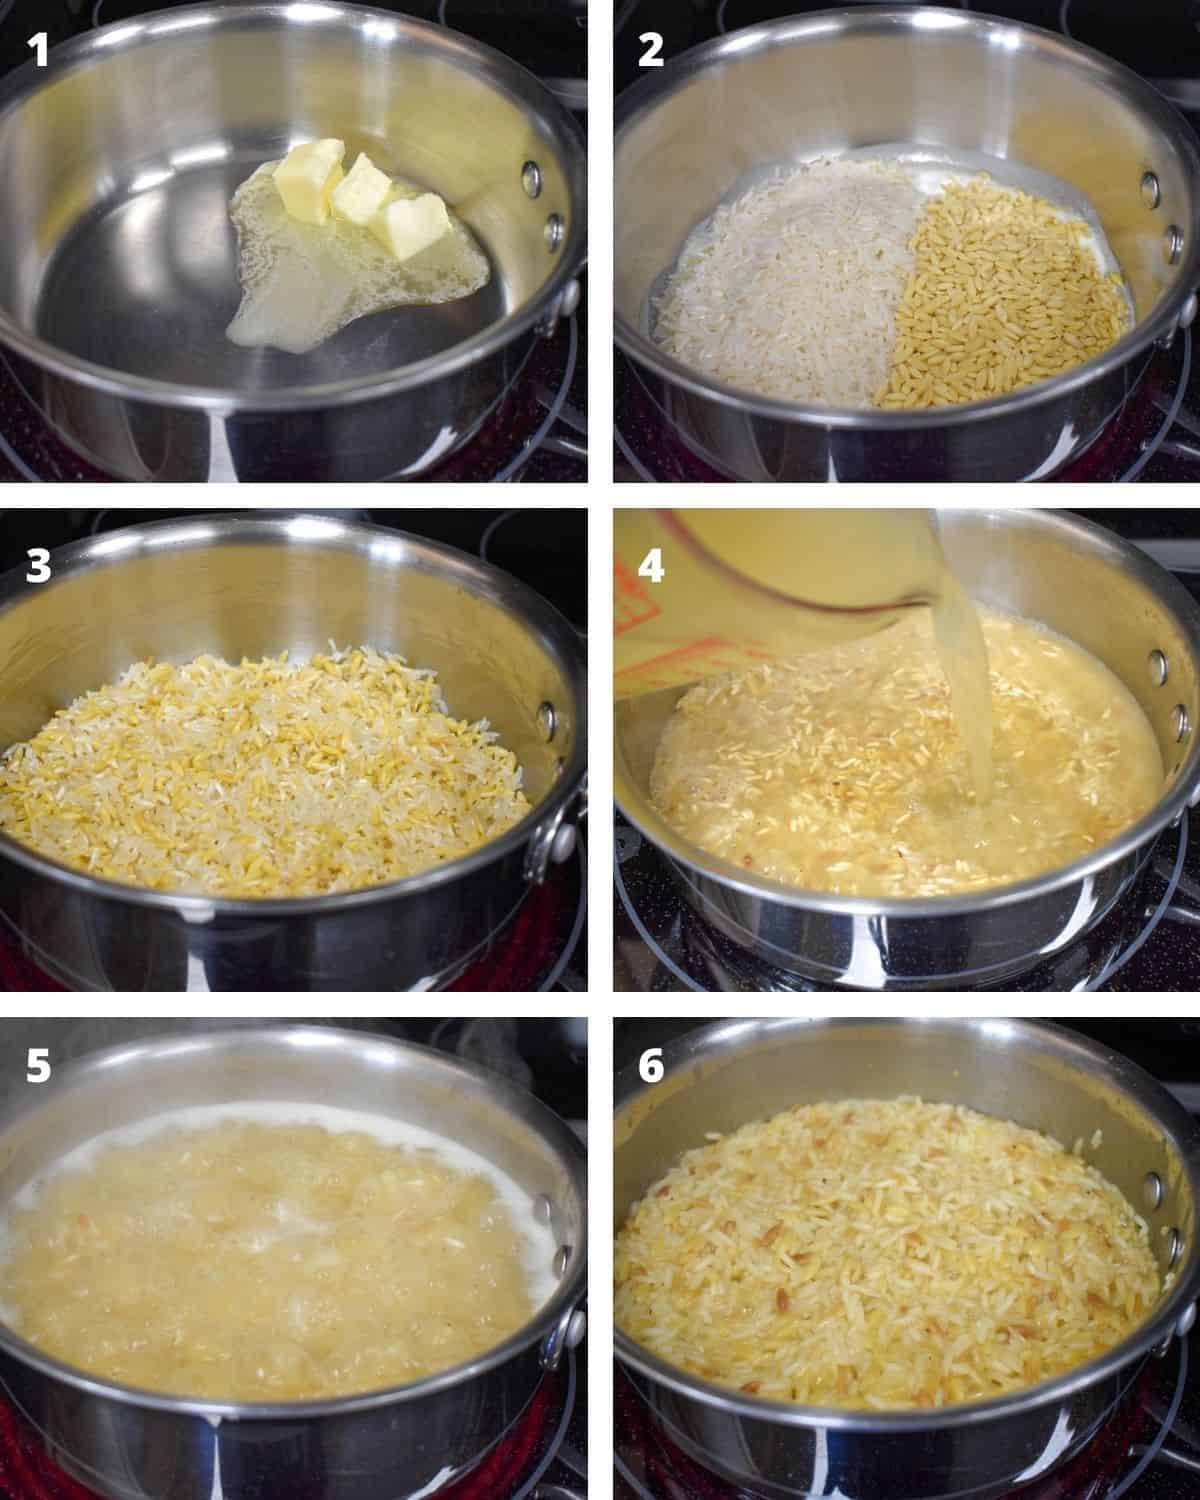 Six images of showing the steps of making the rice.